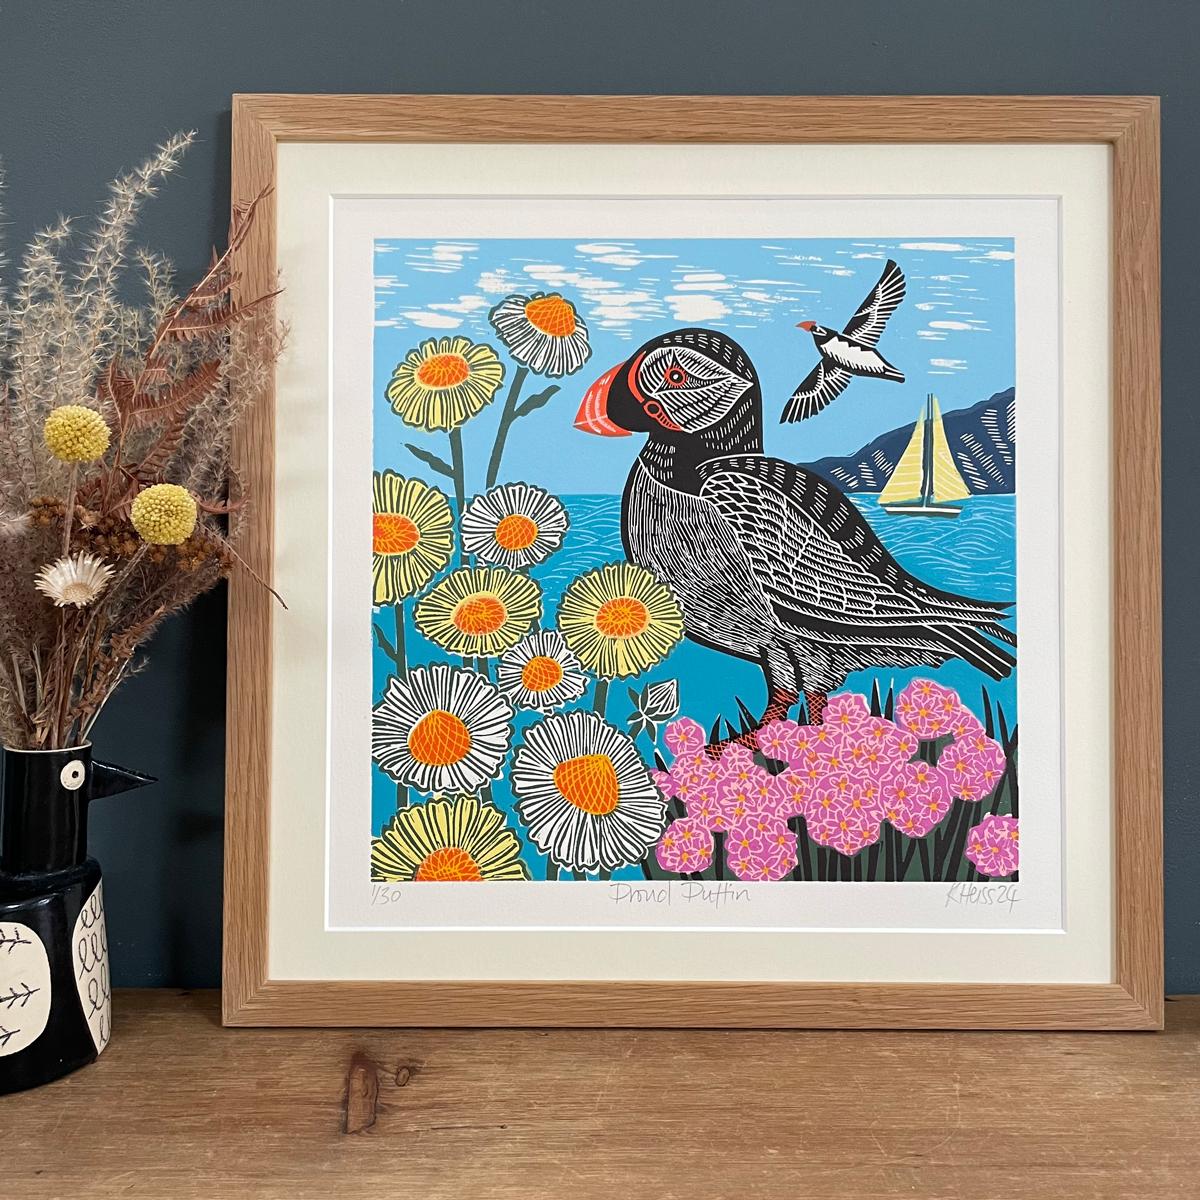 A proud puffin sits on the cliff’s edge amongst the sea thrift and the ox-eye daisies. Linocut Limited Edition of 30 Printed with oil based relief inks on 300gsm soft white Somerset velvet paper.

ADDITIONAL INFORMATION:
Archival Inkjet Print,